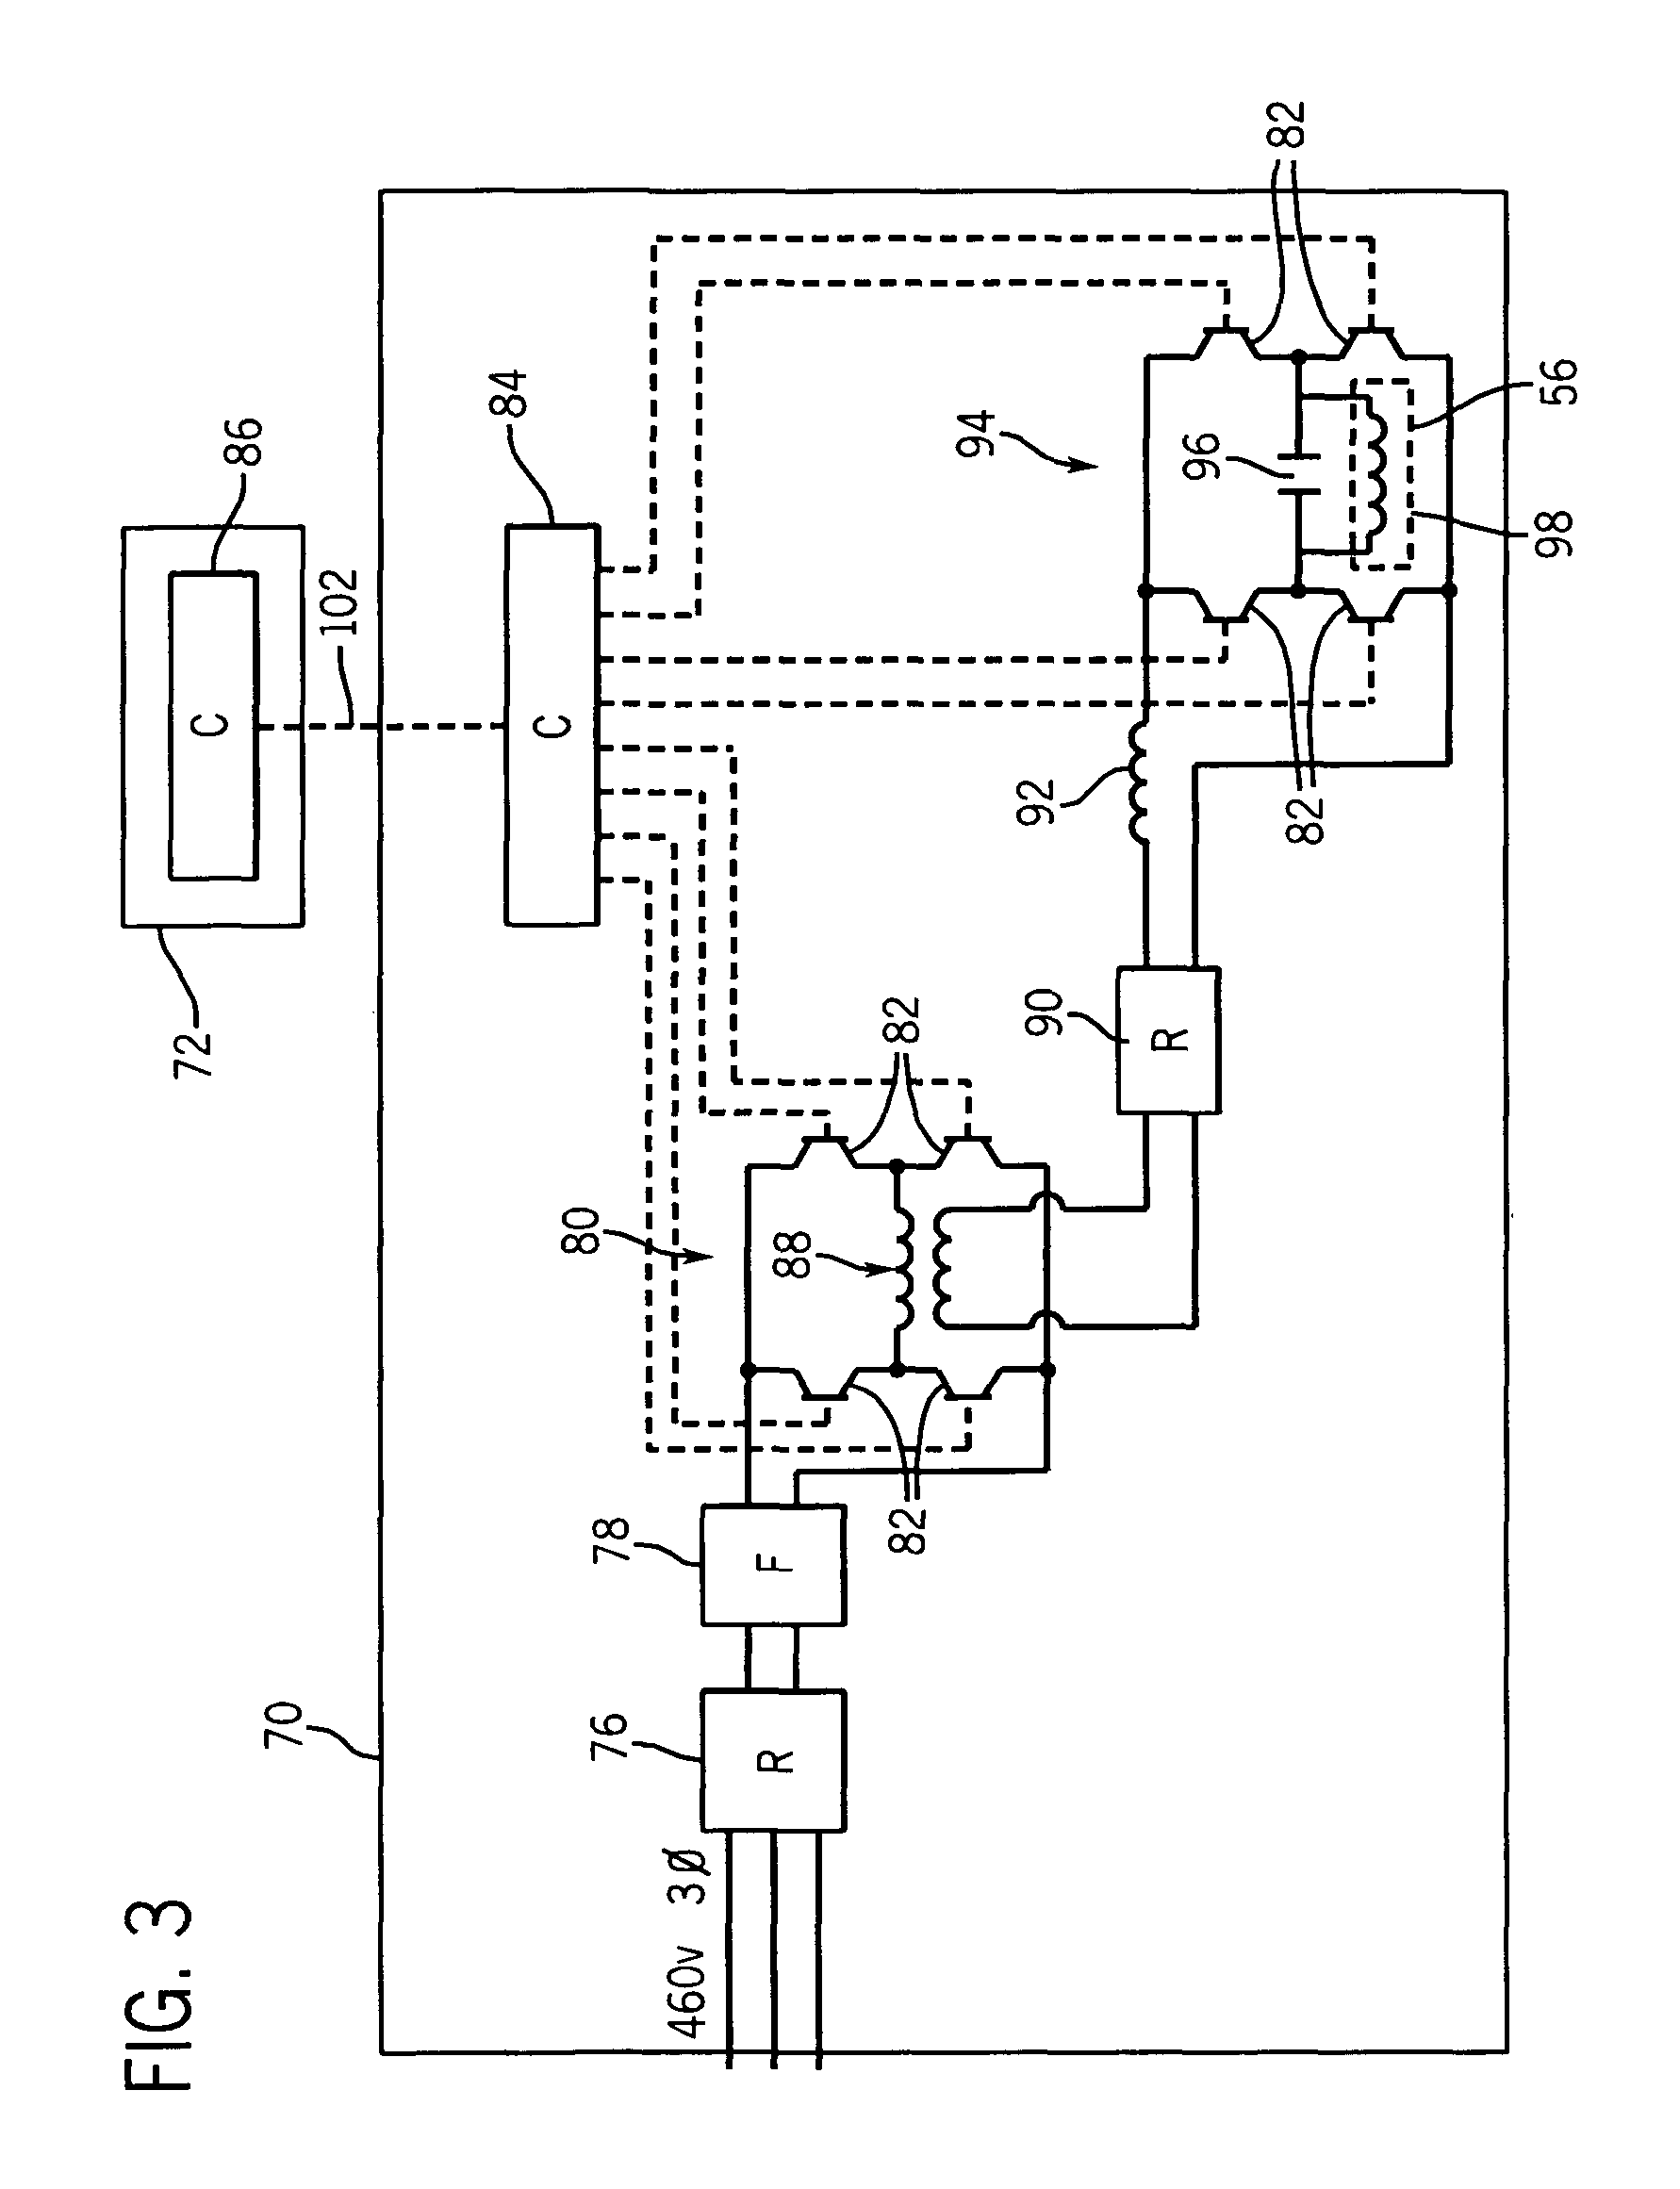 On-site induction heating apparatus